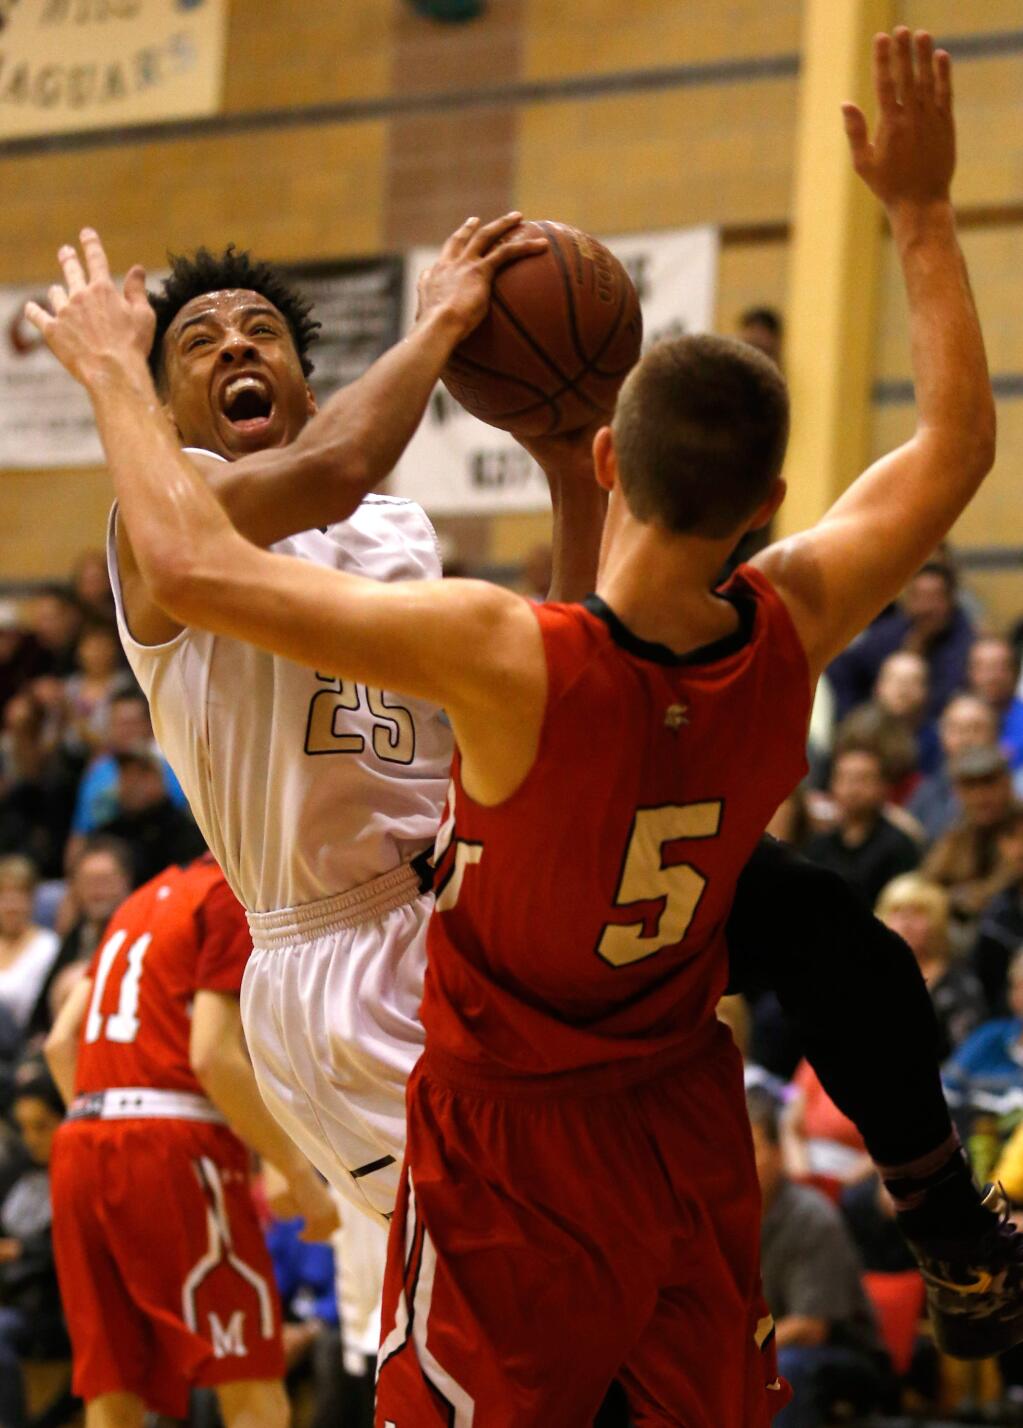 Windsor's Parker Canady (25), left, fights his way to the basket against Montgomery's Joel Seitz (5) during the first half of the NCS Division 2 boys basketball quarterfinal game between Montgomery and Windsor high schools in Windsor, California, on Friday, February 26, 2016. (Alvin Jornada / The Press Democrat)